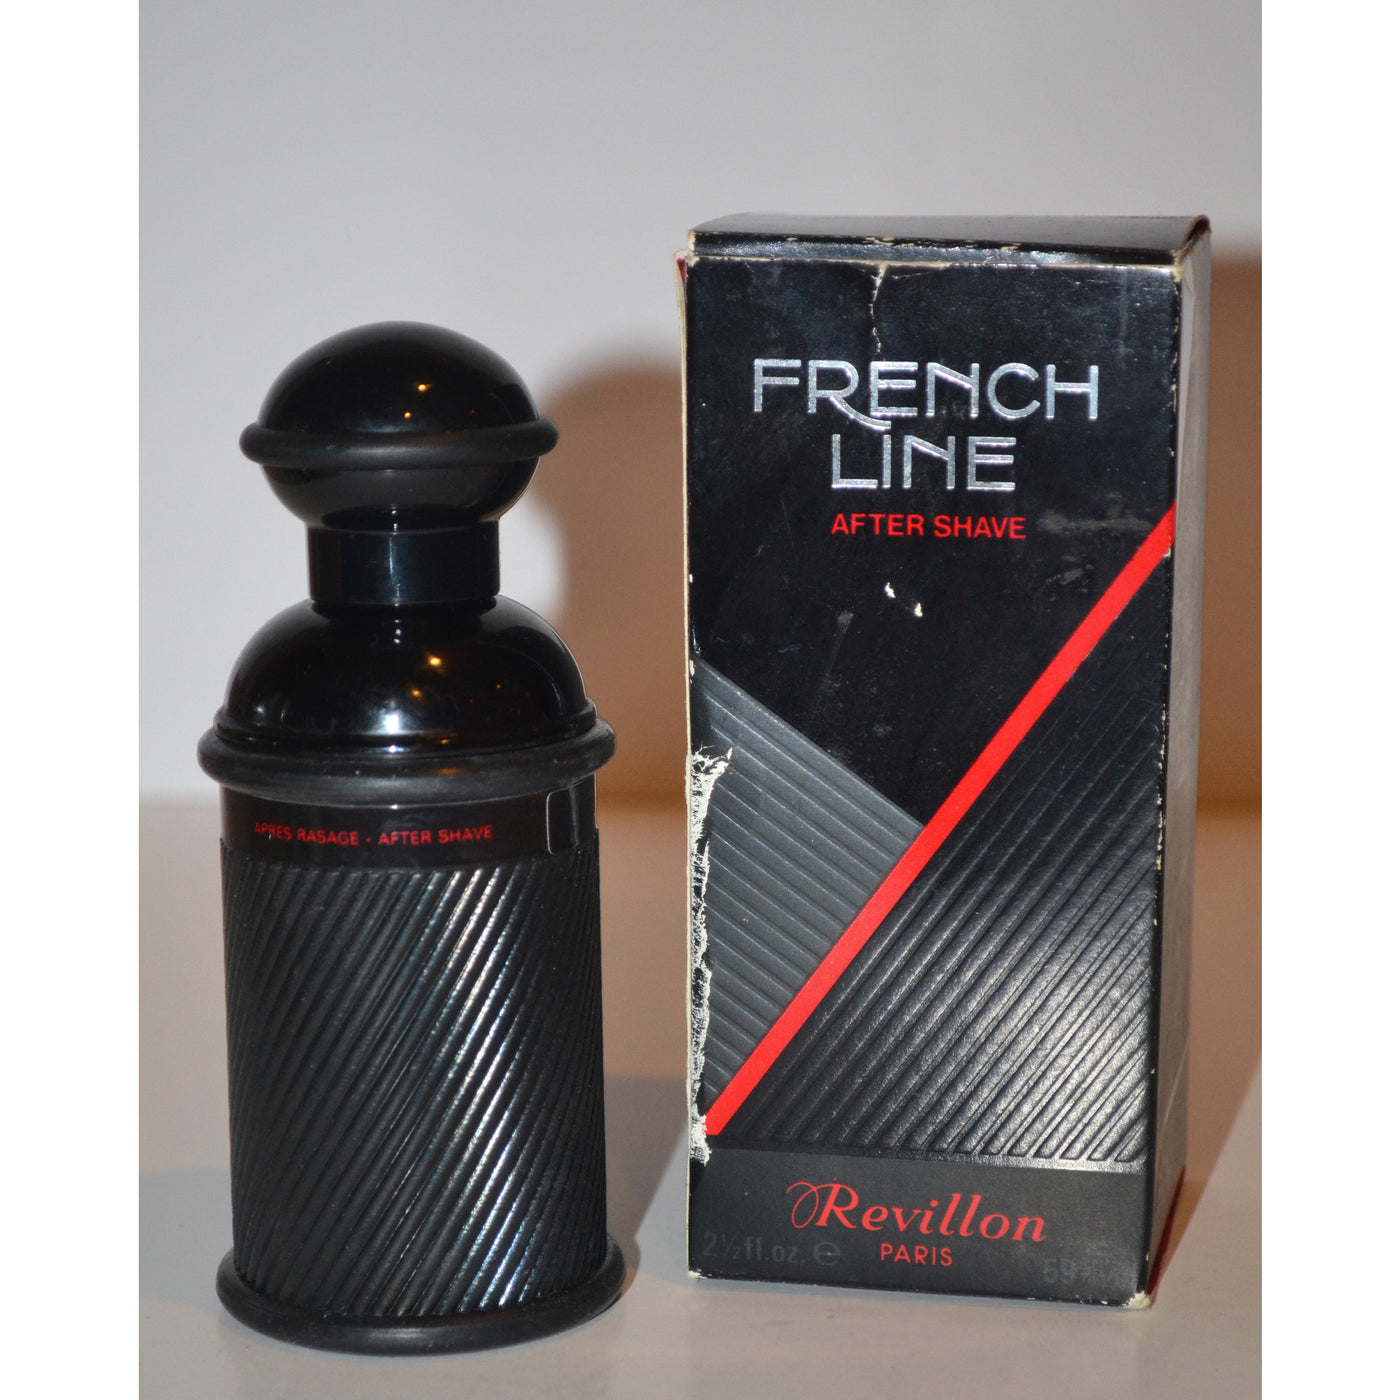 Vintage French Line After Shave By Revillon 